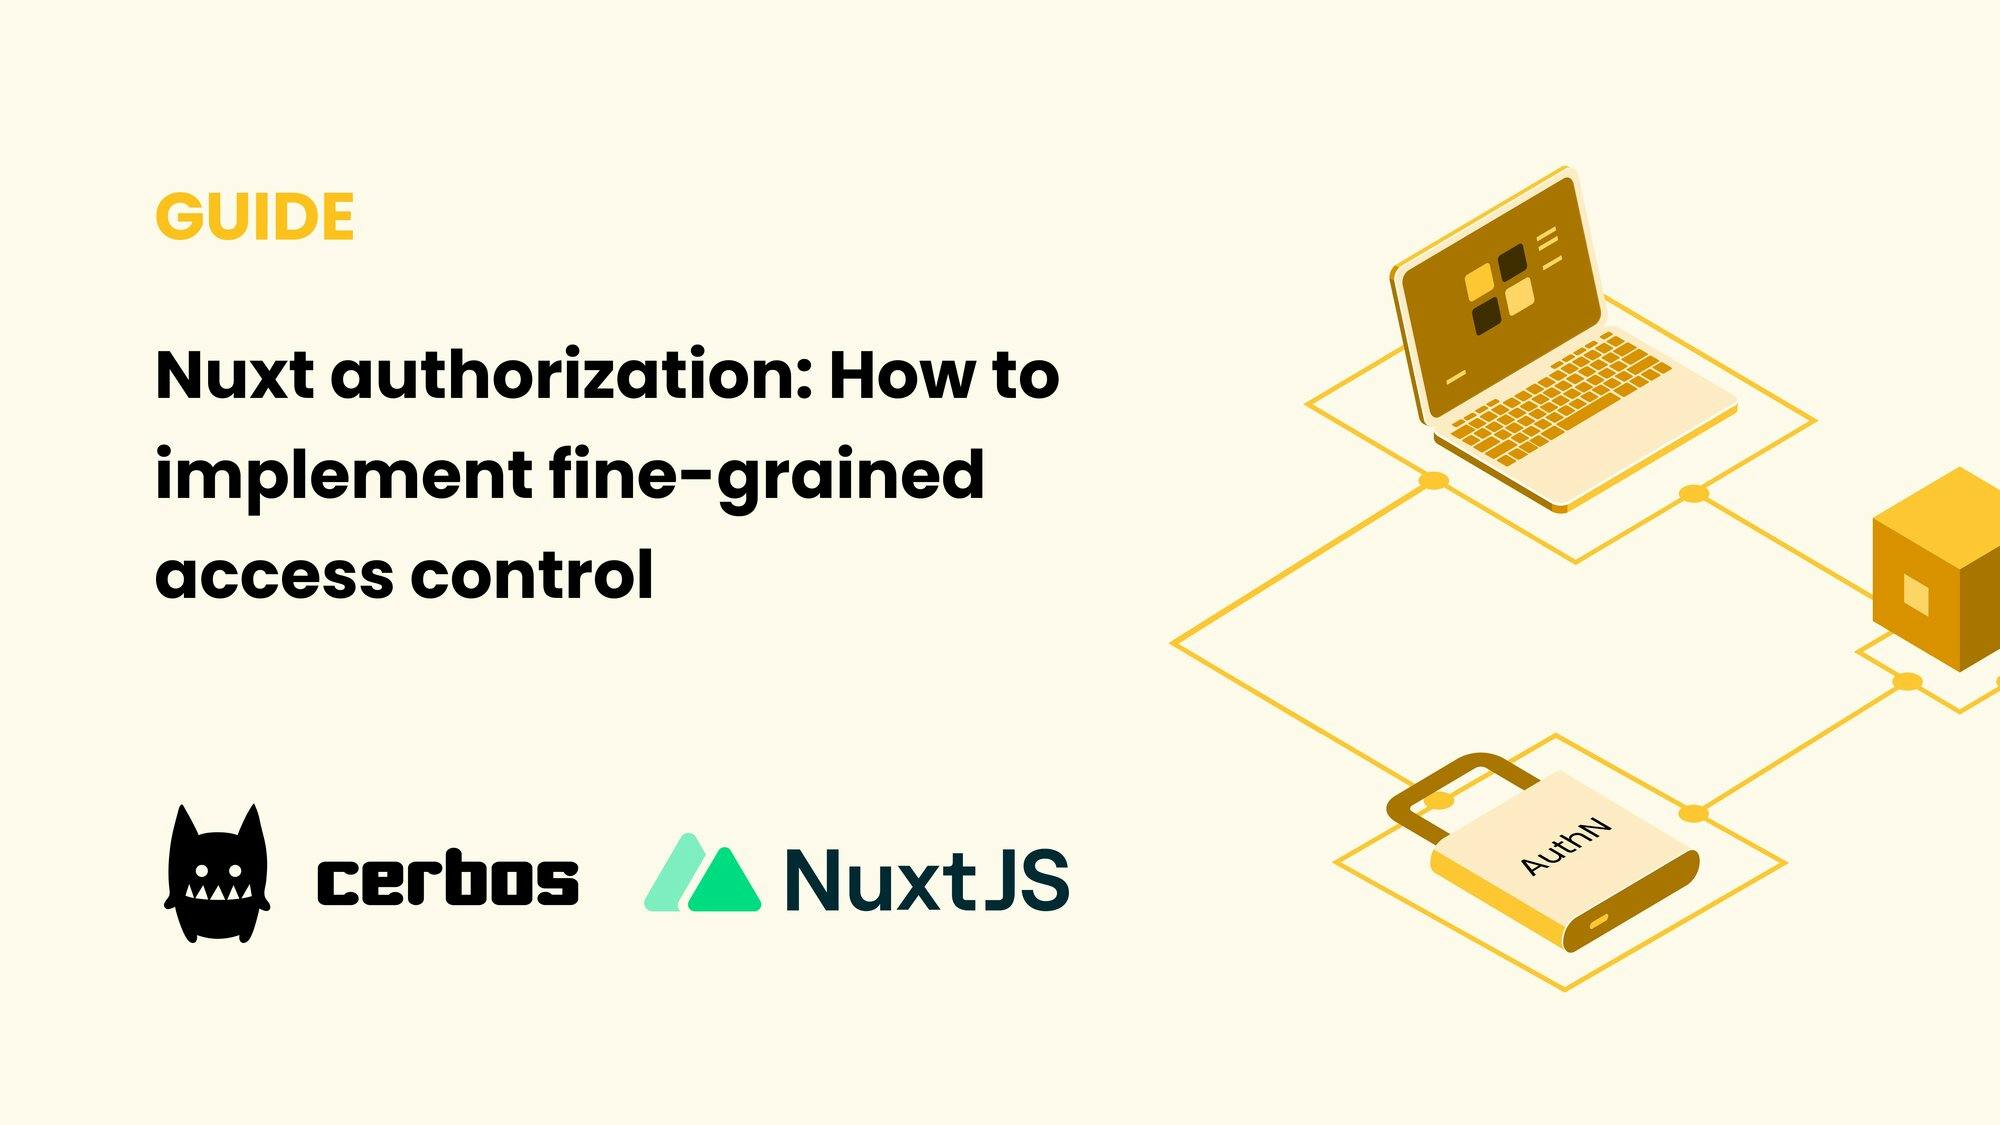 Nuxt authorization: How to implement fine-grained access control